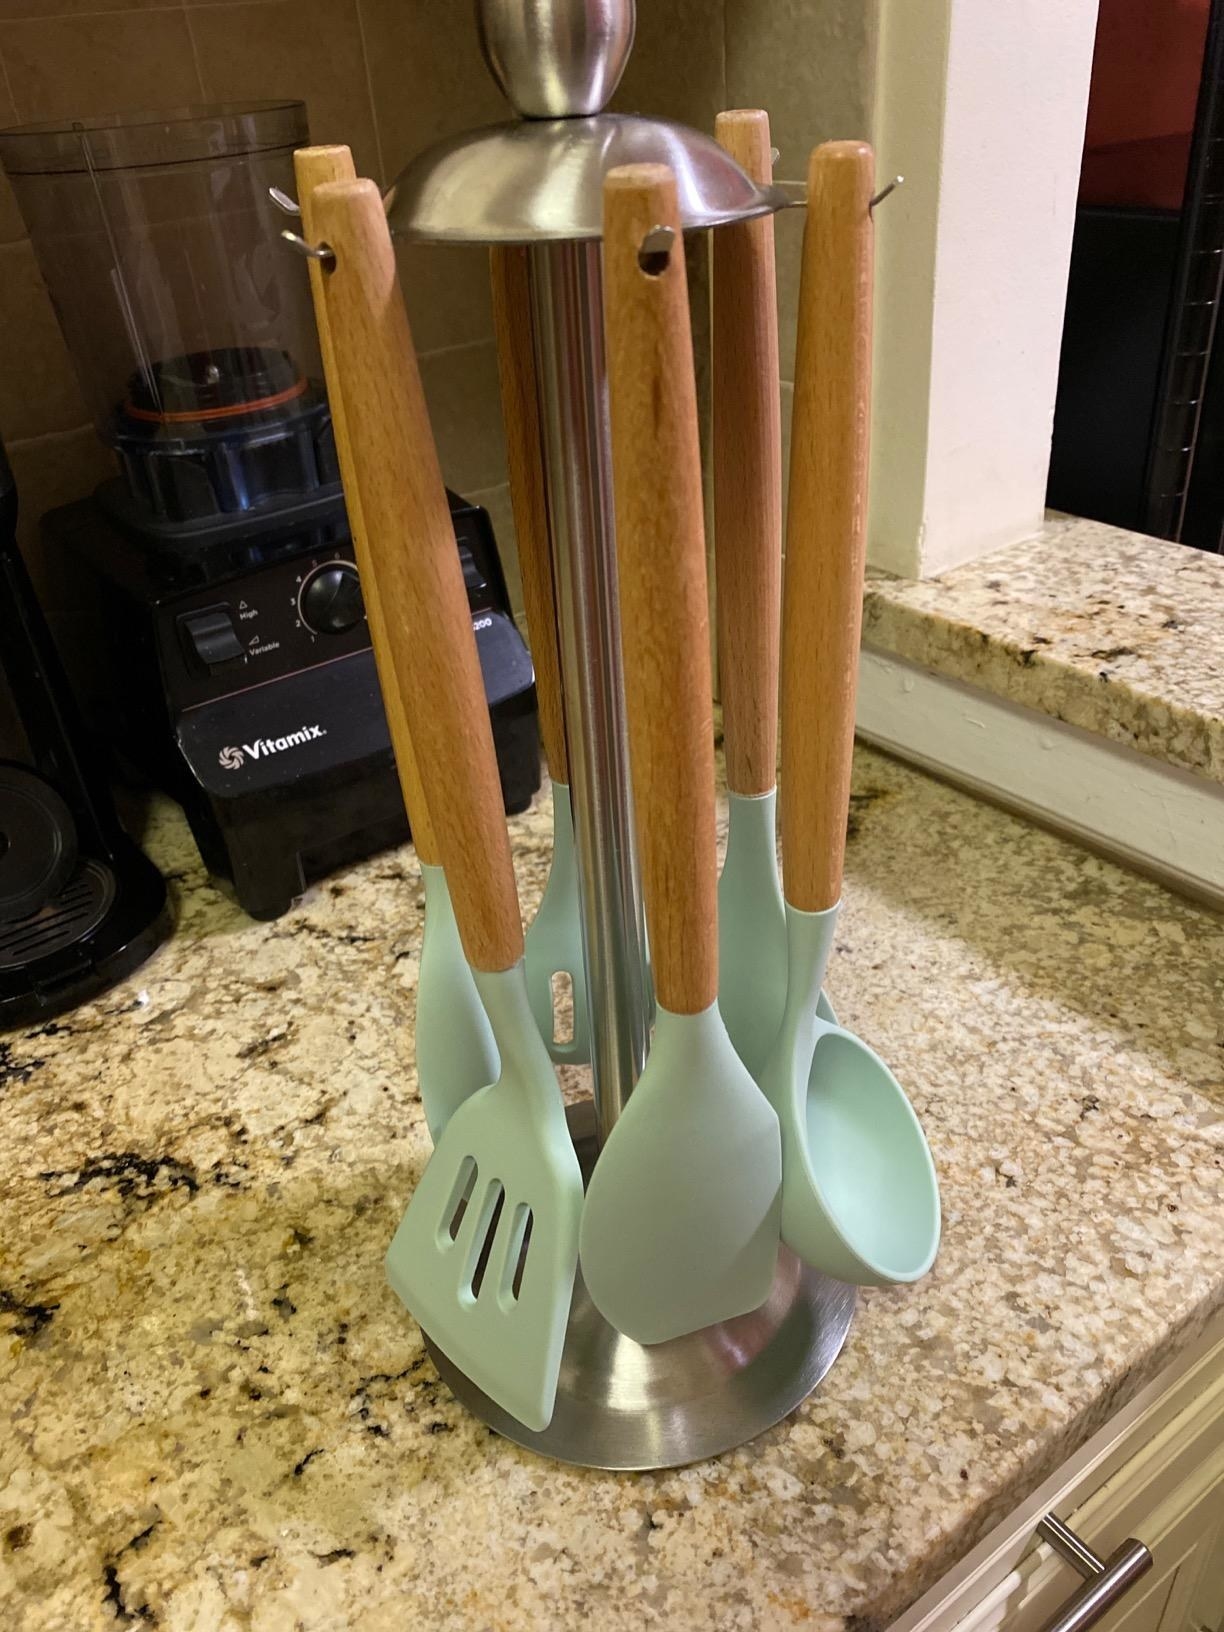 A reviewer photo of the utensils in light green, hanging from their storage stand, which has a circular base, thin body, and hooks at the top that can hold the utensils